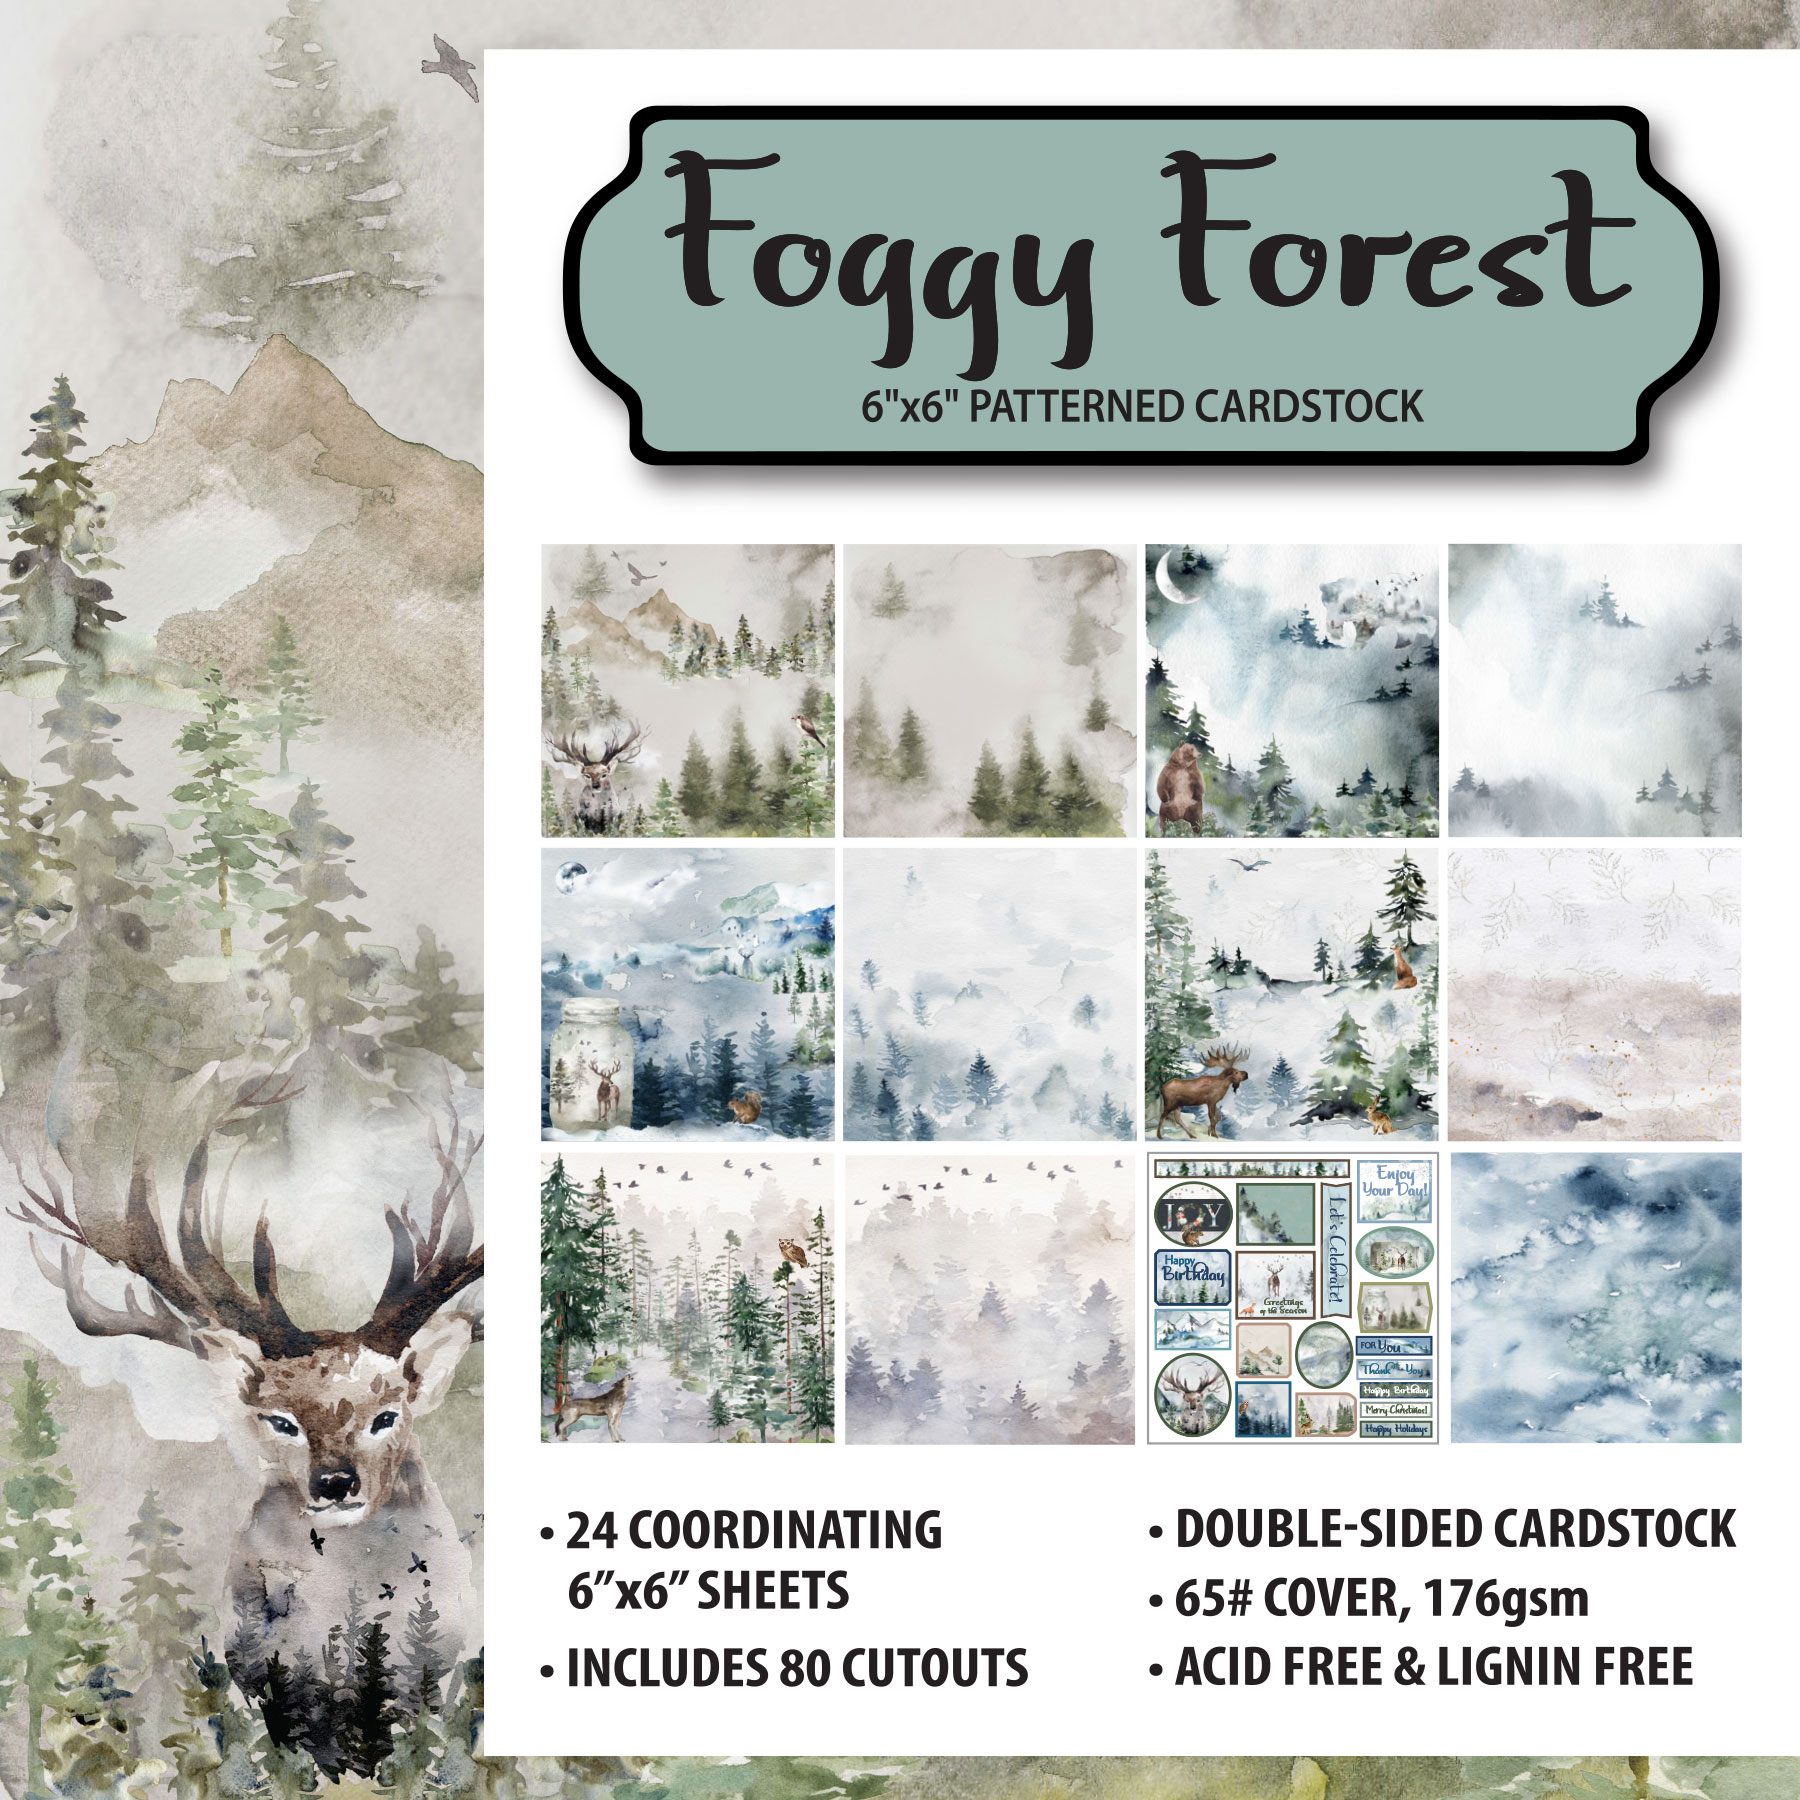 Foggy Forest 6x6 Patterned Cardstock